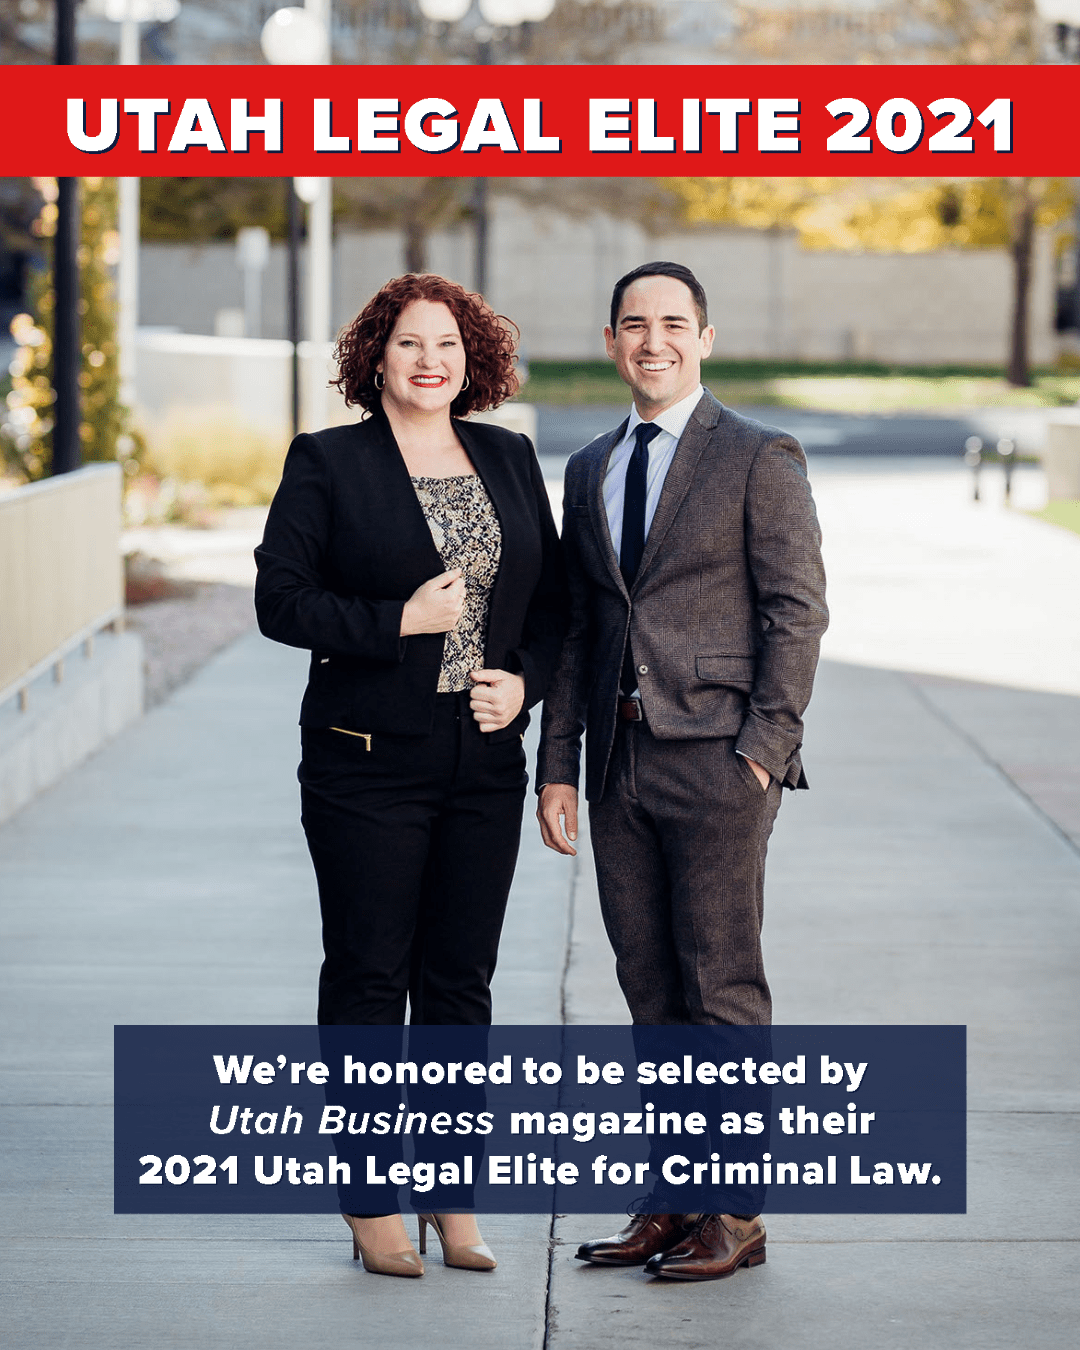 photo of team Kate Conyers and Jesse Nix with text about Utah Legal Elite